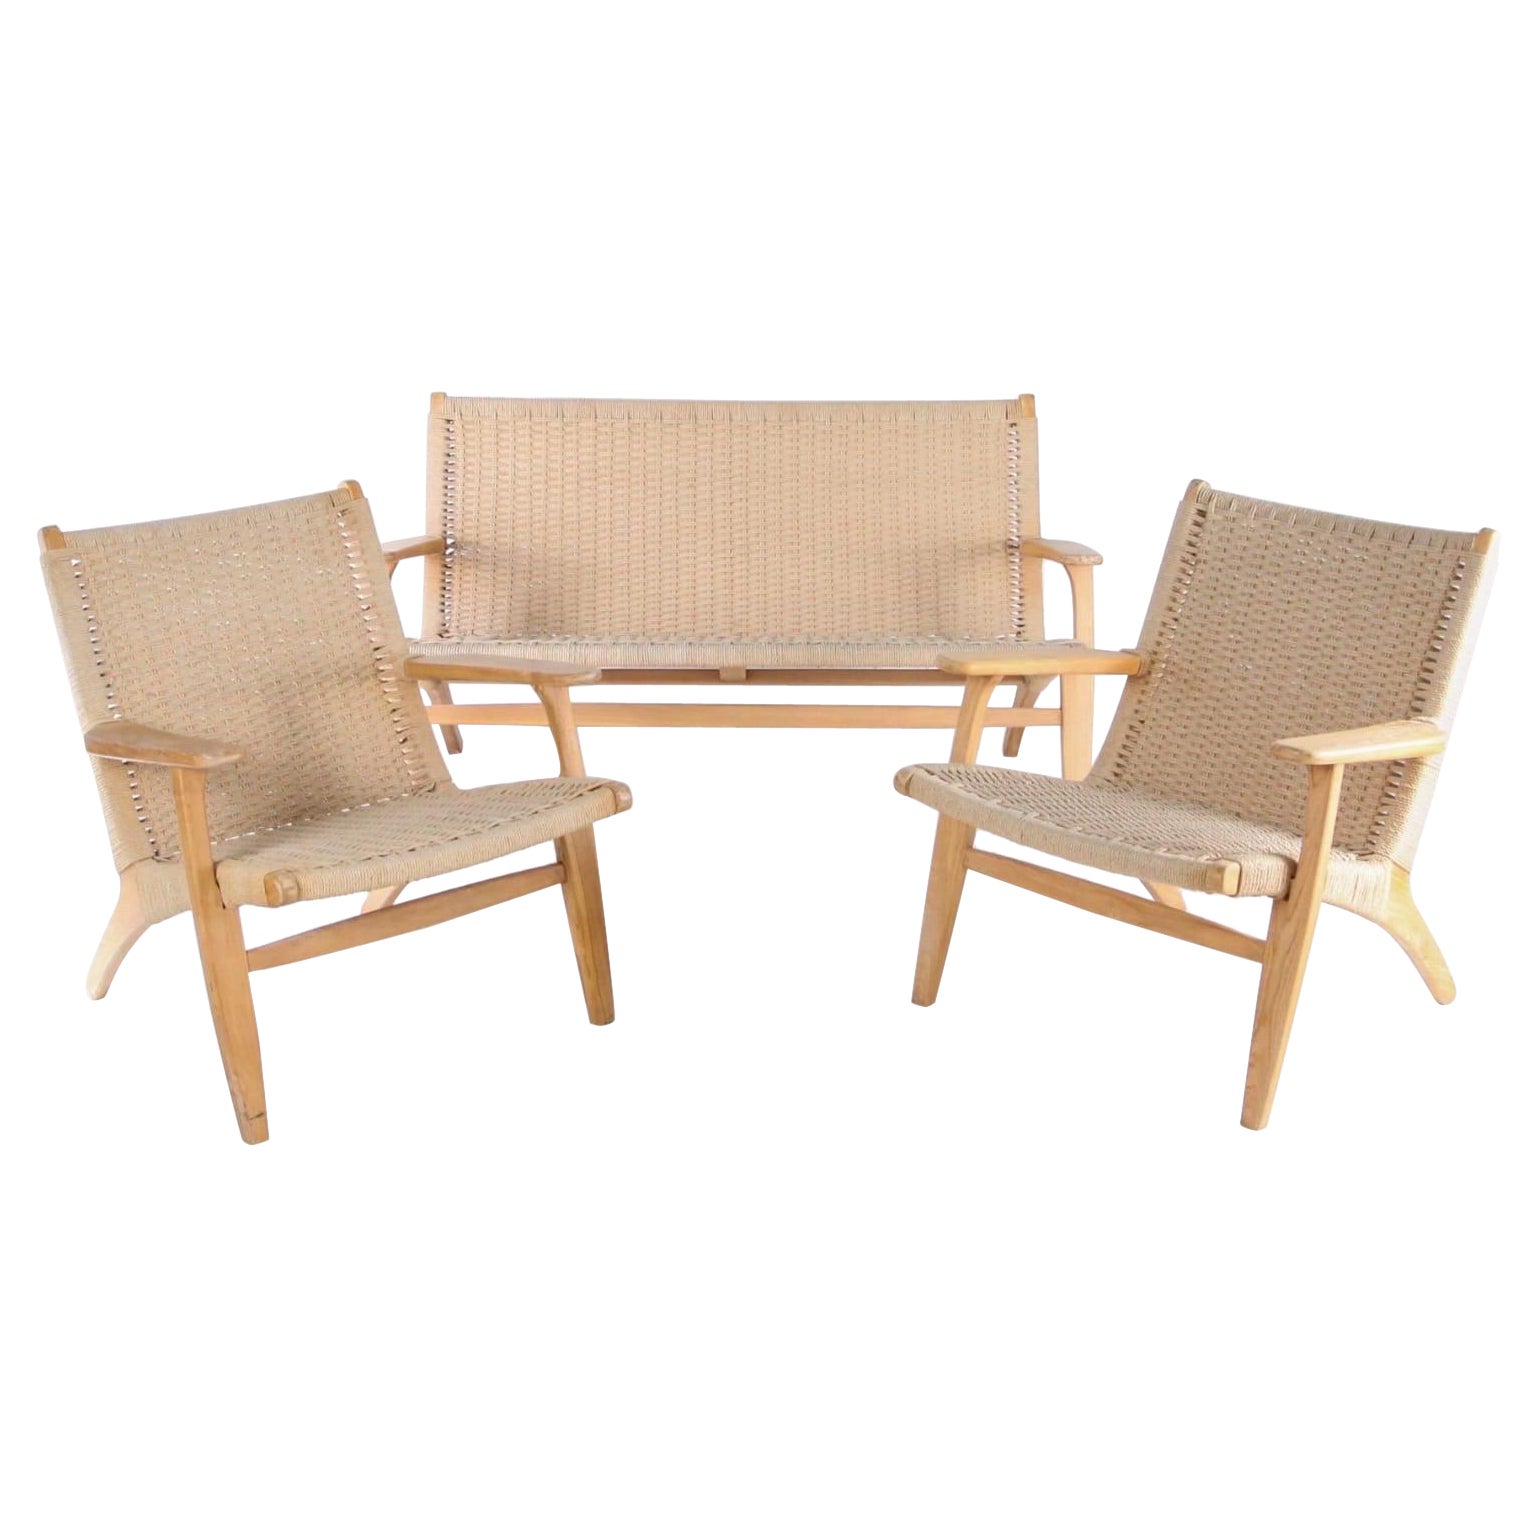 Braided rope and wood lounge set For Sale